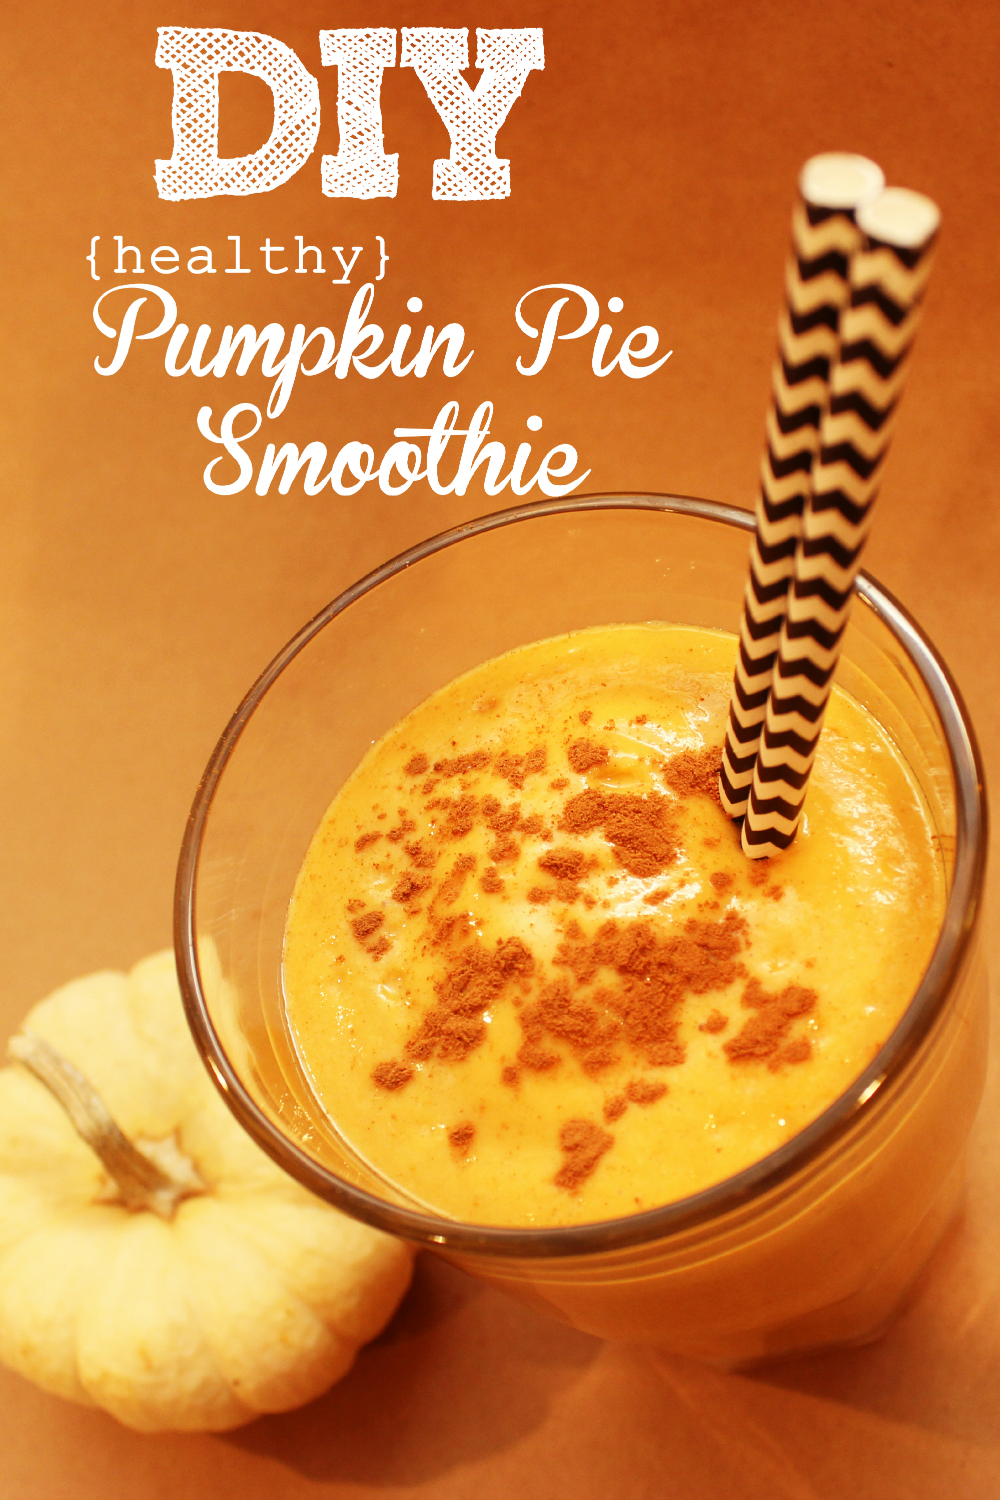 This pumpkin pie smoothie is healthy and delicious. Two of our favorite things. The recipe is easy, and perfect for fall!